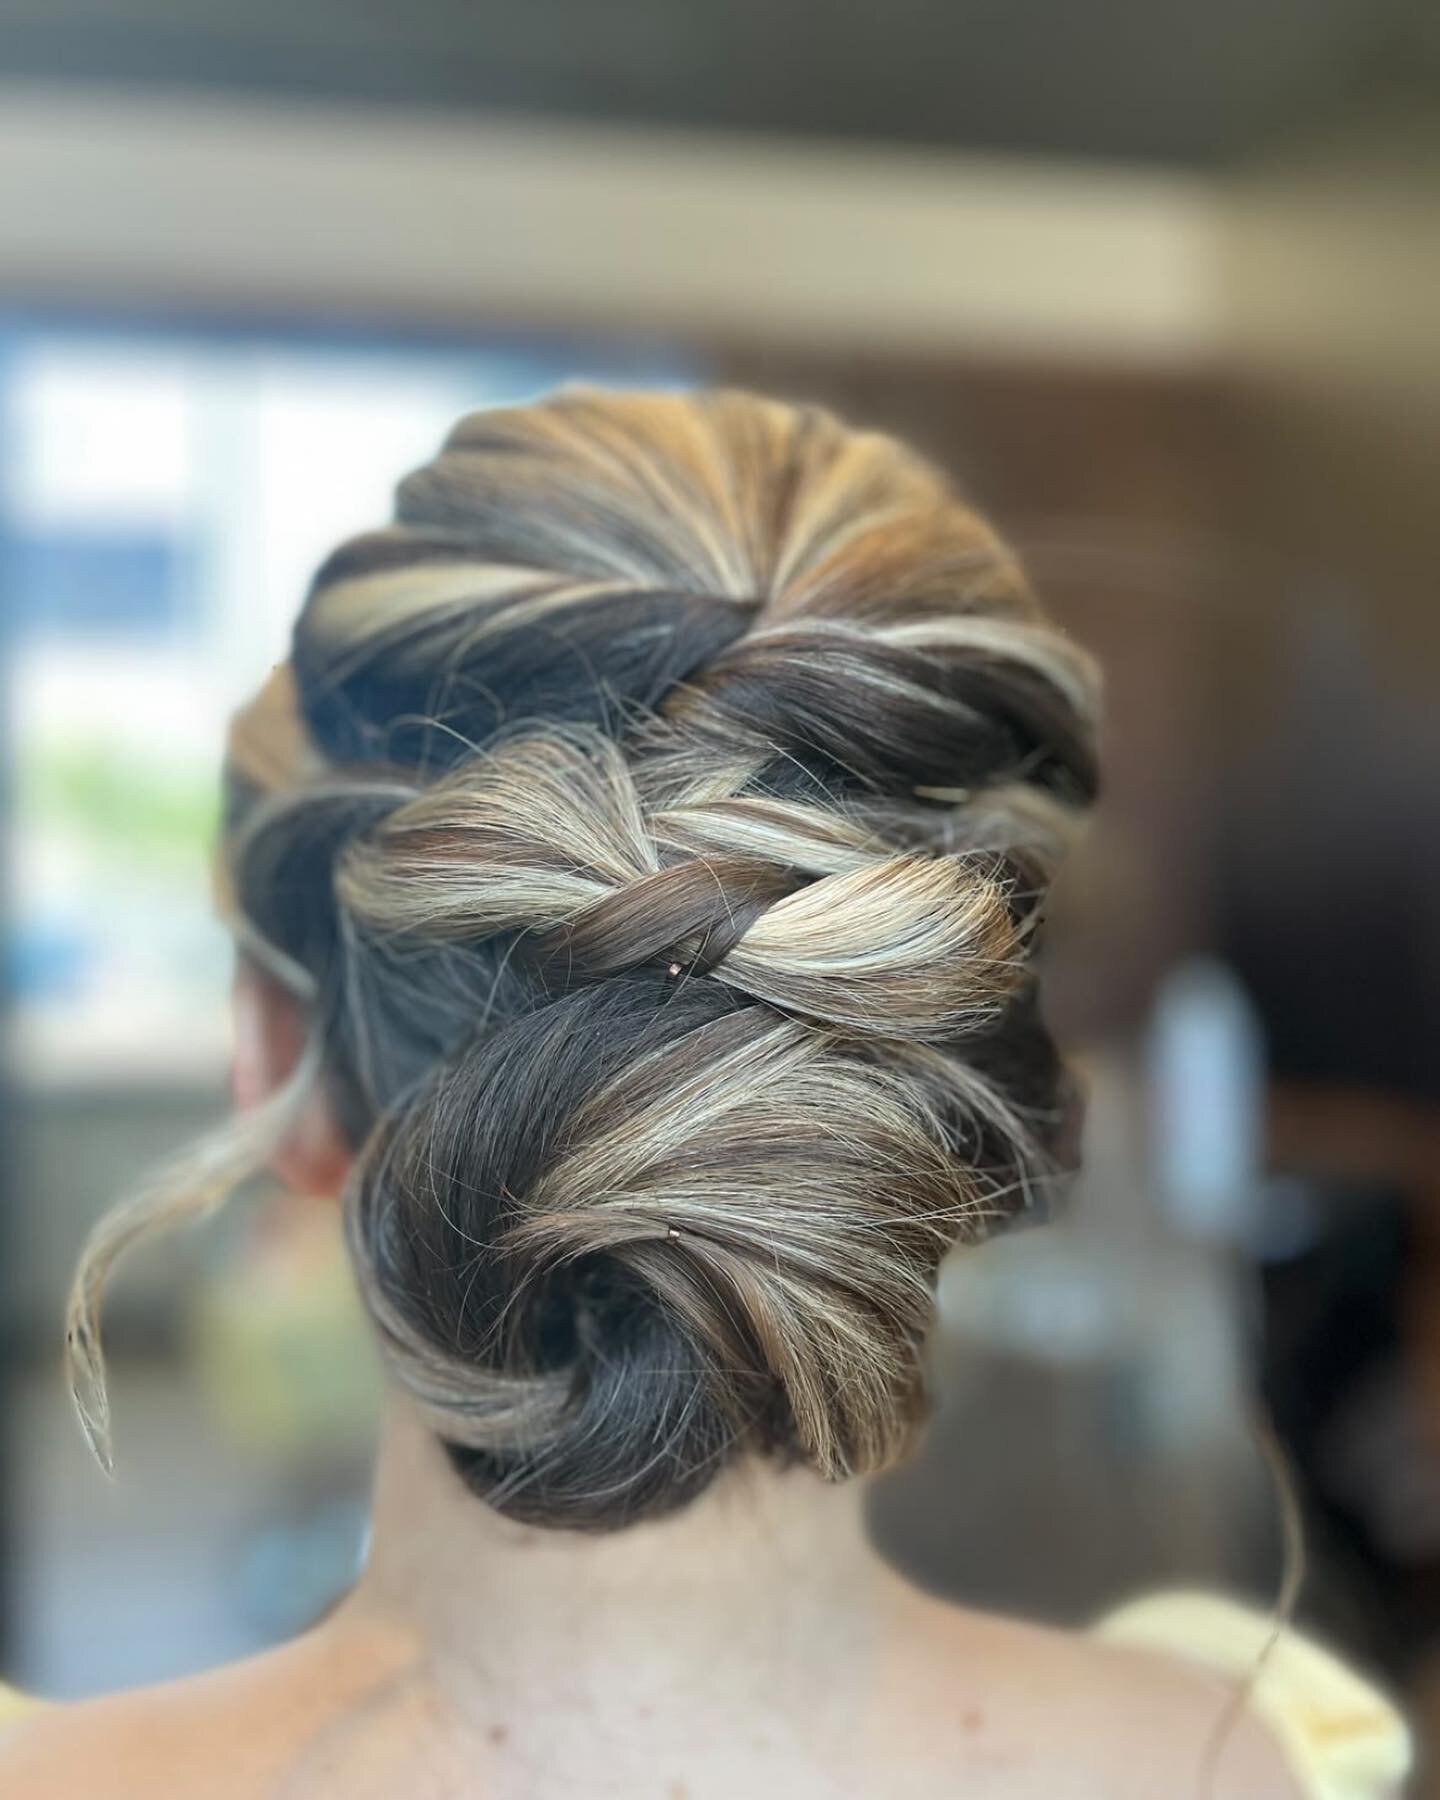 Do you need hair and makeup for your wedding day? We have you covered! If you would like information on our packages and pricing click the link at the bottom! Hope to talk to you soon. 
&bull;
&bull;
Hair by @hairbygab_95 
&bull;
&bull;
https://www.s